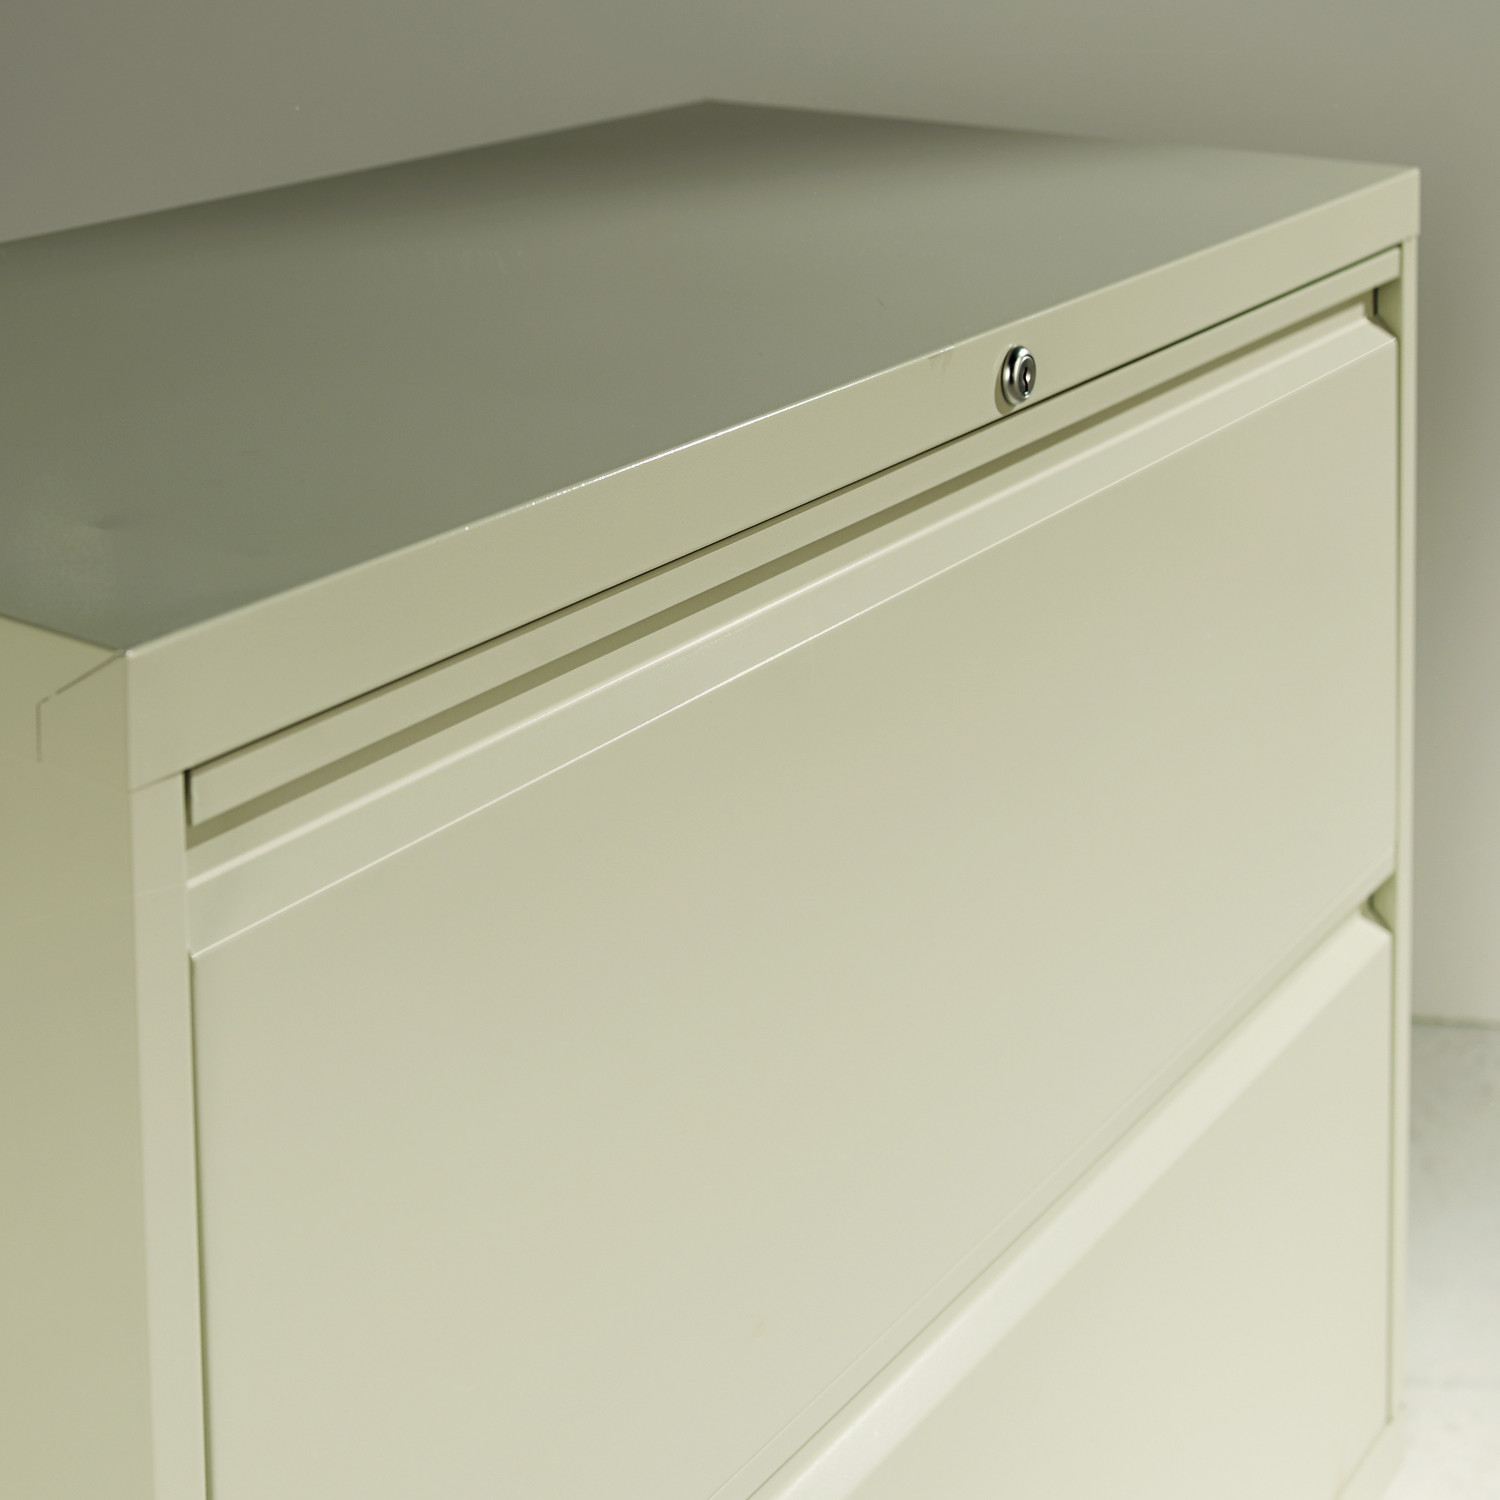 Alera 4 Drawers Lateral Lockable Filing Cabinet, Black - image 2 of 3